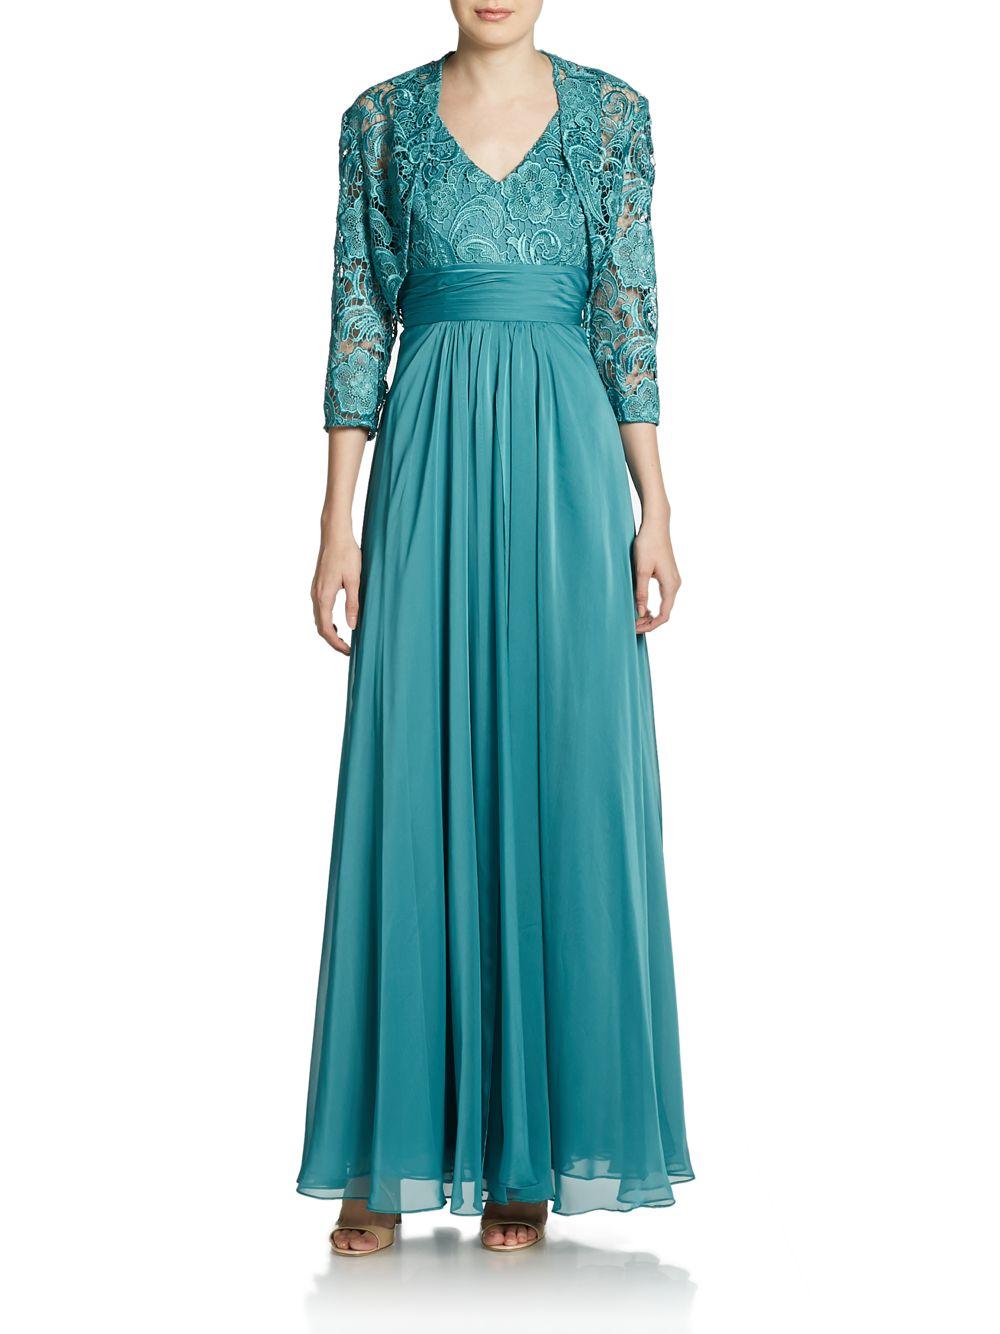 Adrianna Papell Lacechiffon Empire Gown Shrug in Green - Lyst